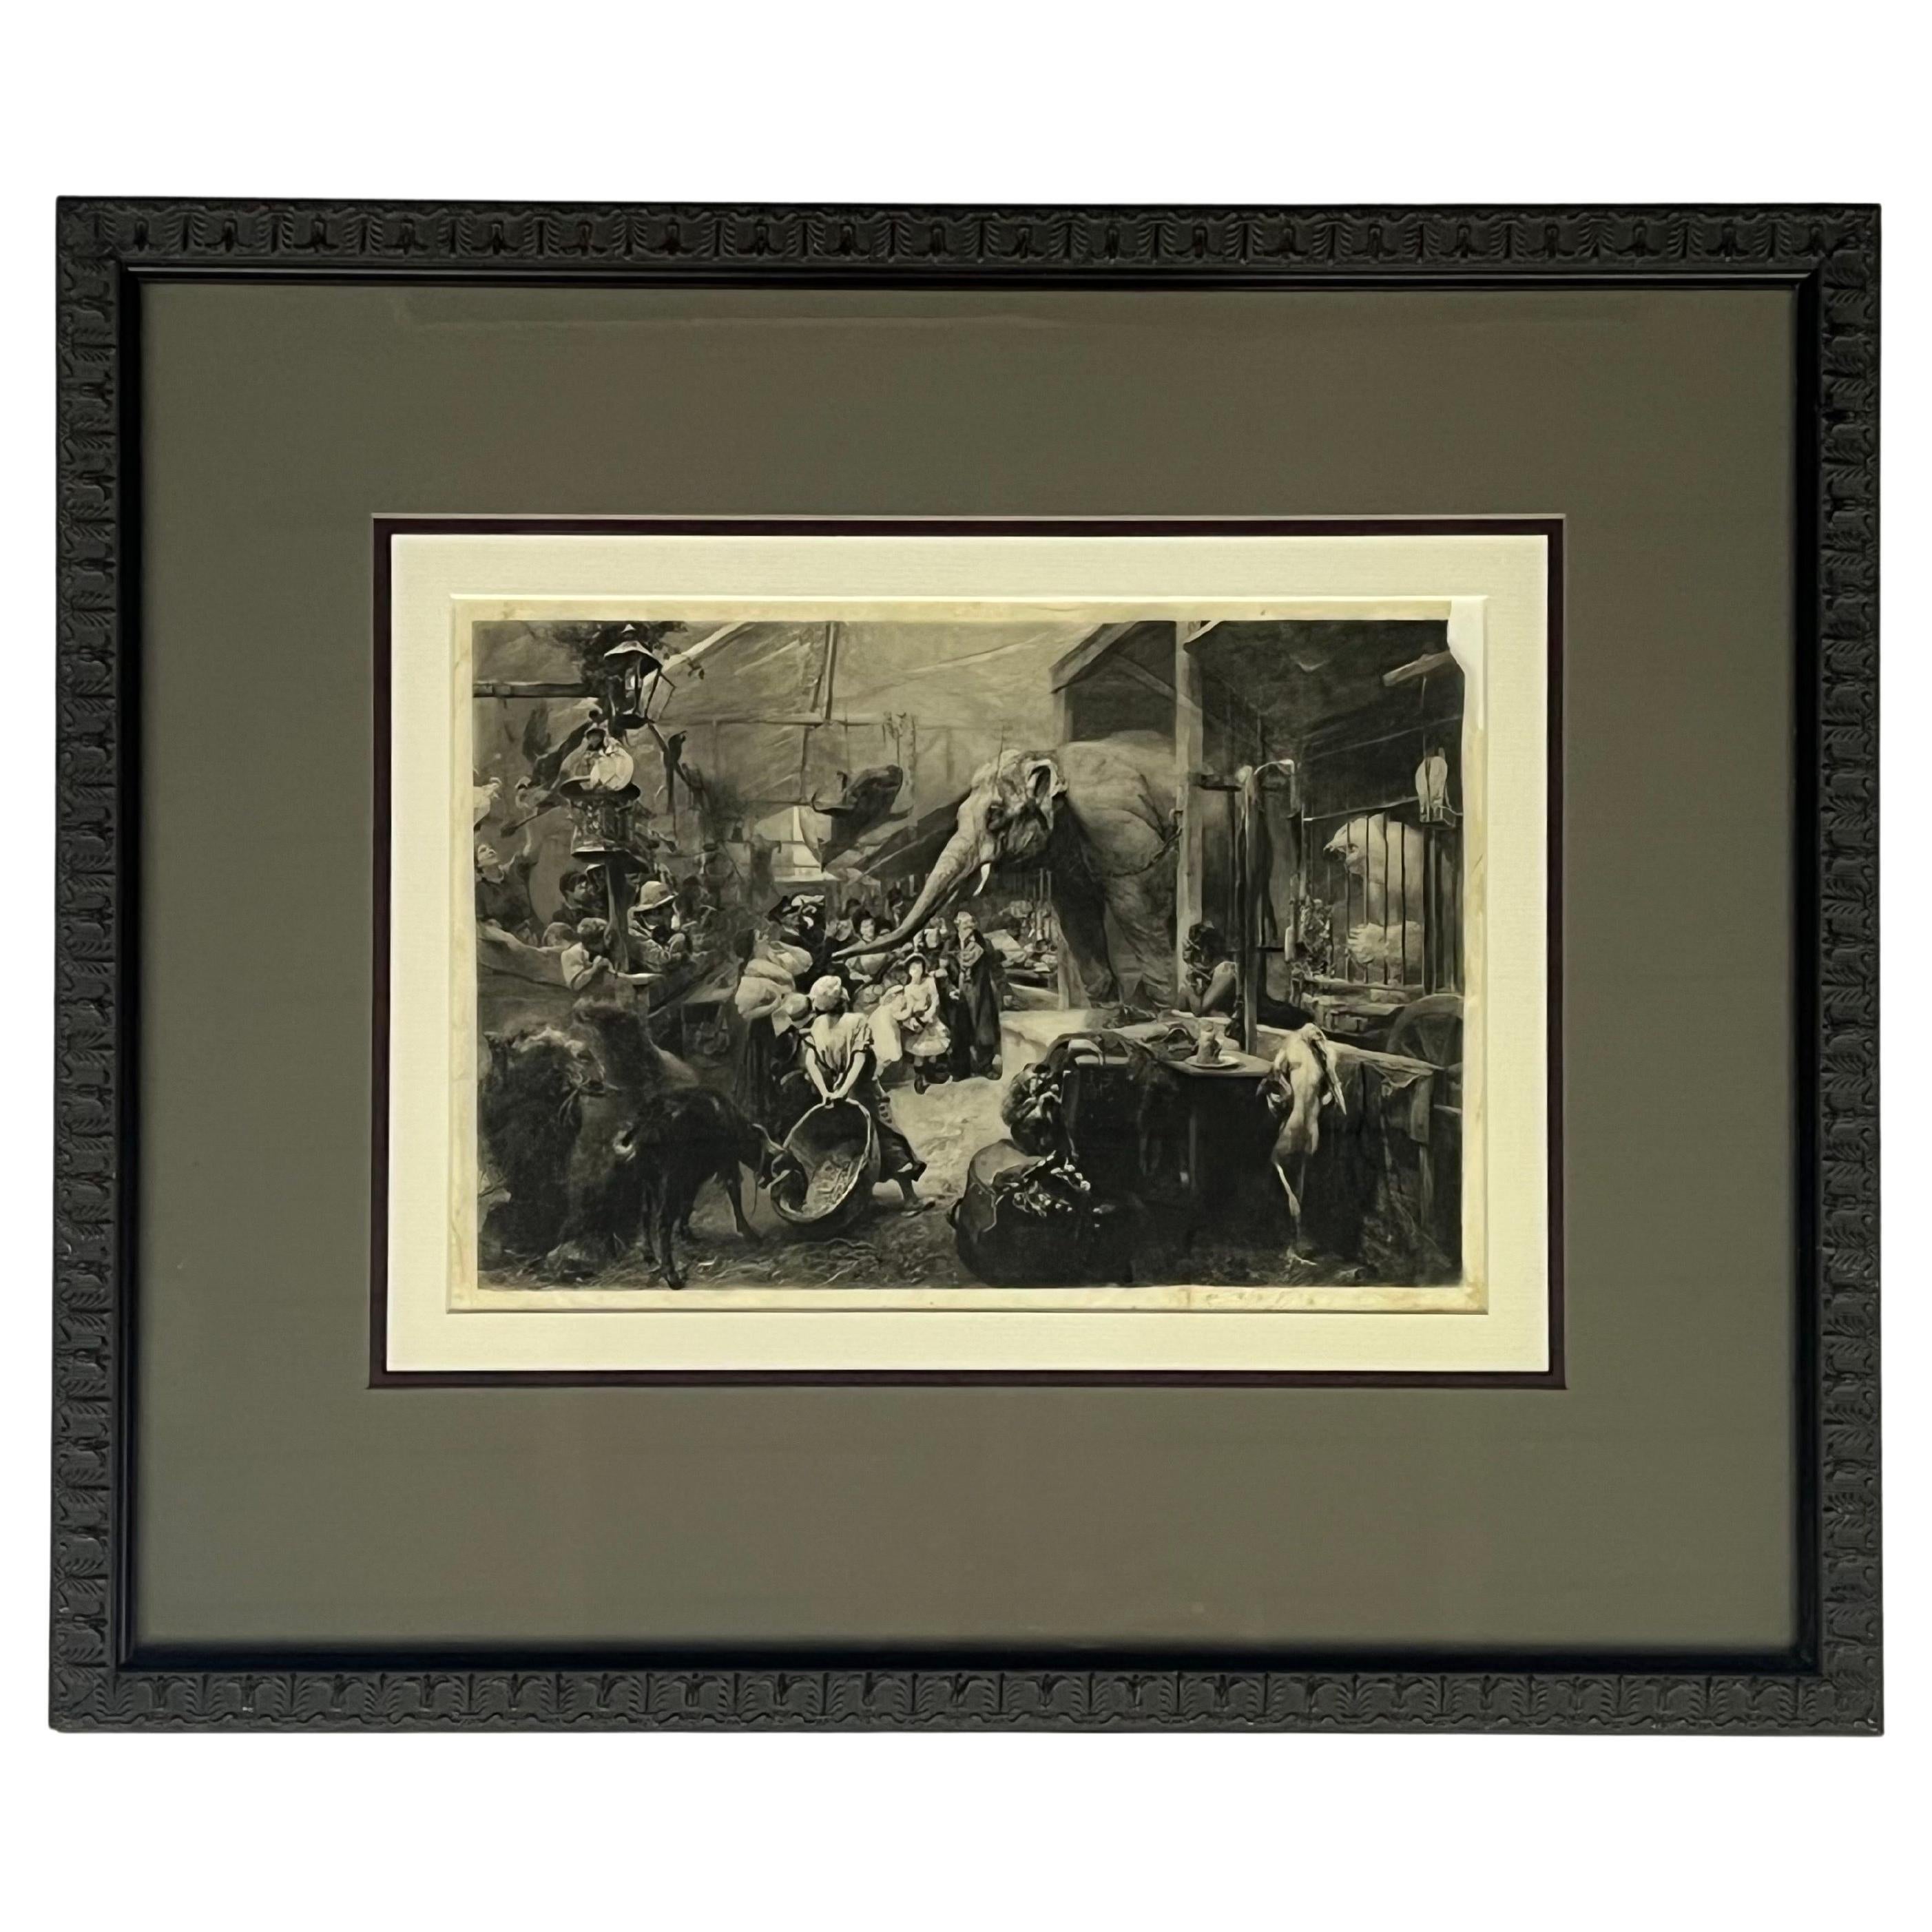 Antique Photogravure of a Tierbude or Circus Zoo by Paul Meyerheim German Artist For Sale